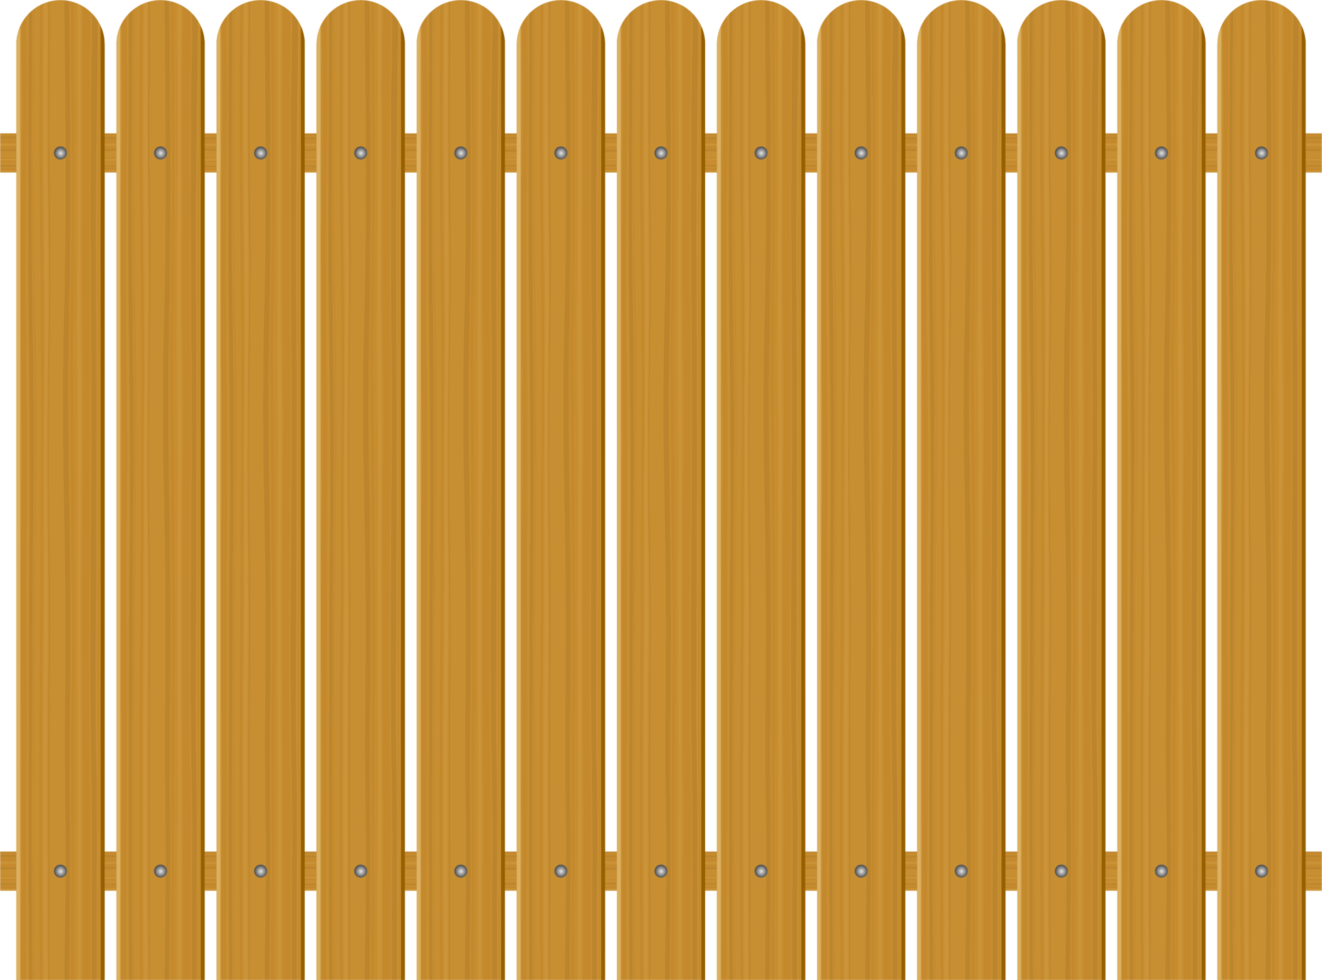 Wooden fence vector illustration isolated on white background png